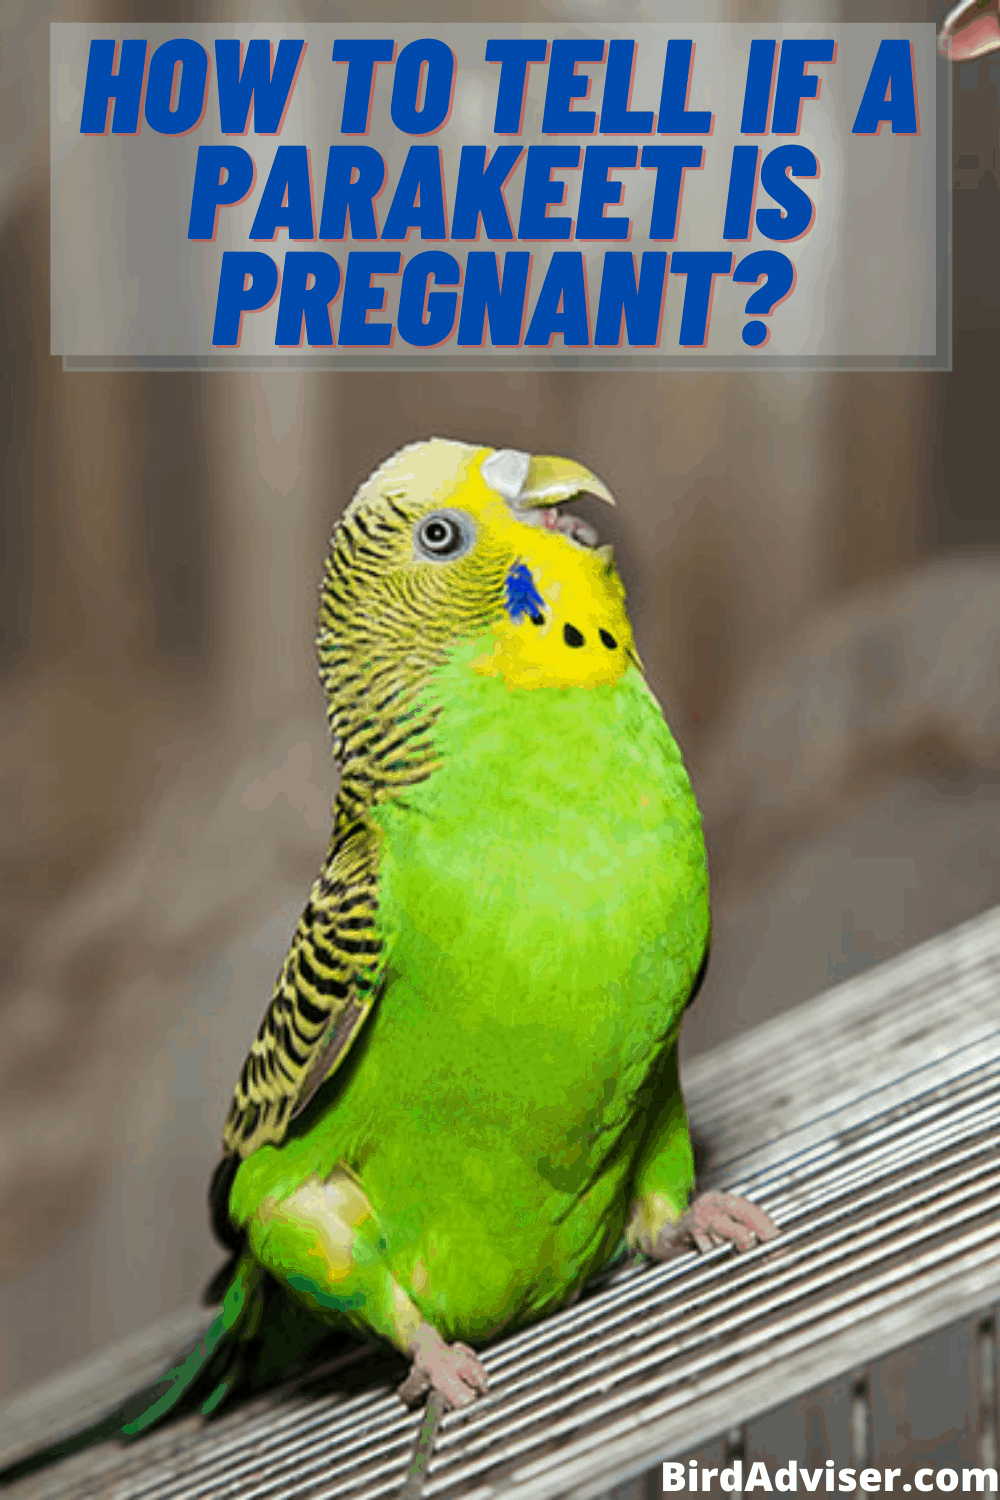 How to Tell If a Parakeet is Pregnant? (Updated 2021)